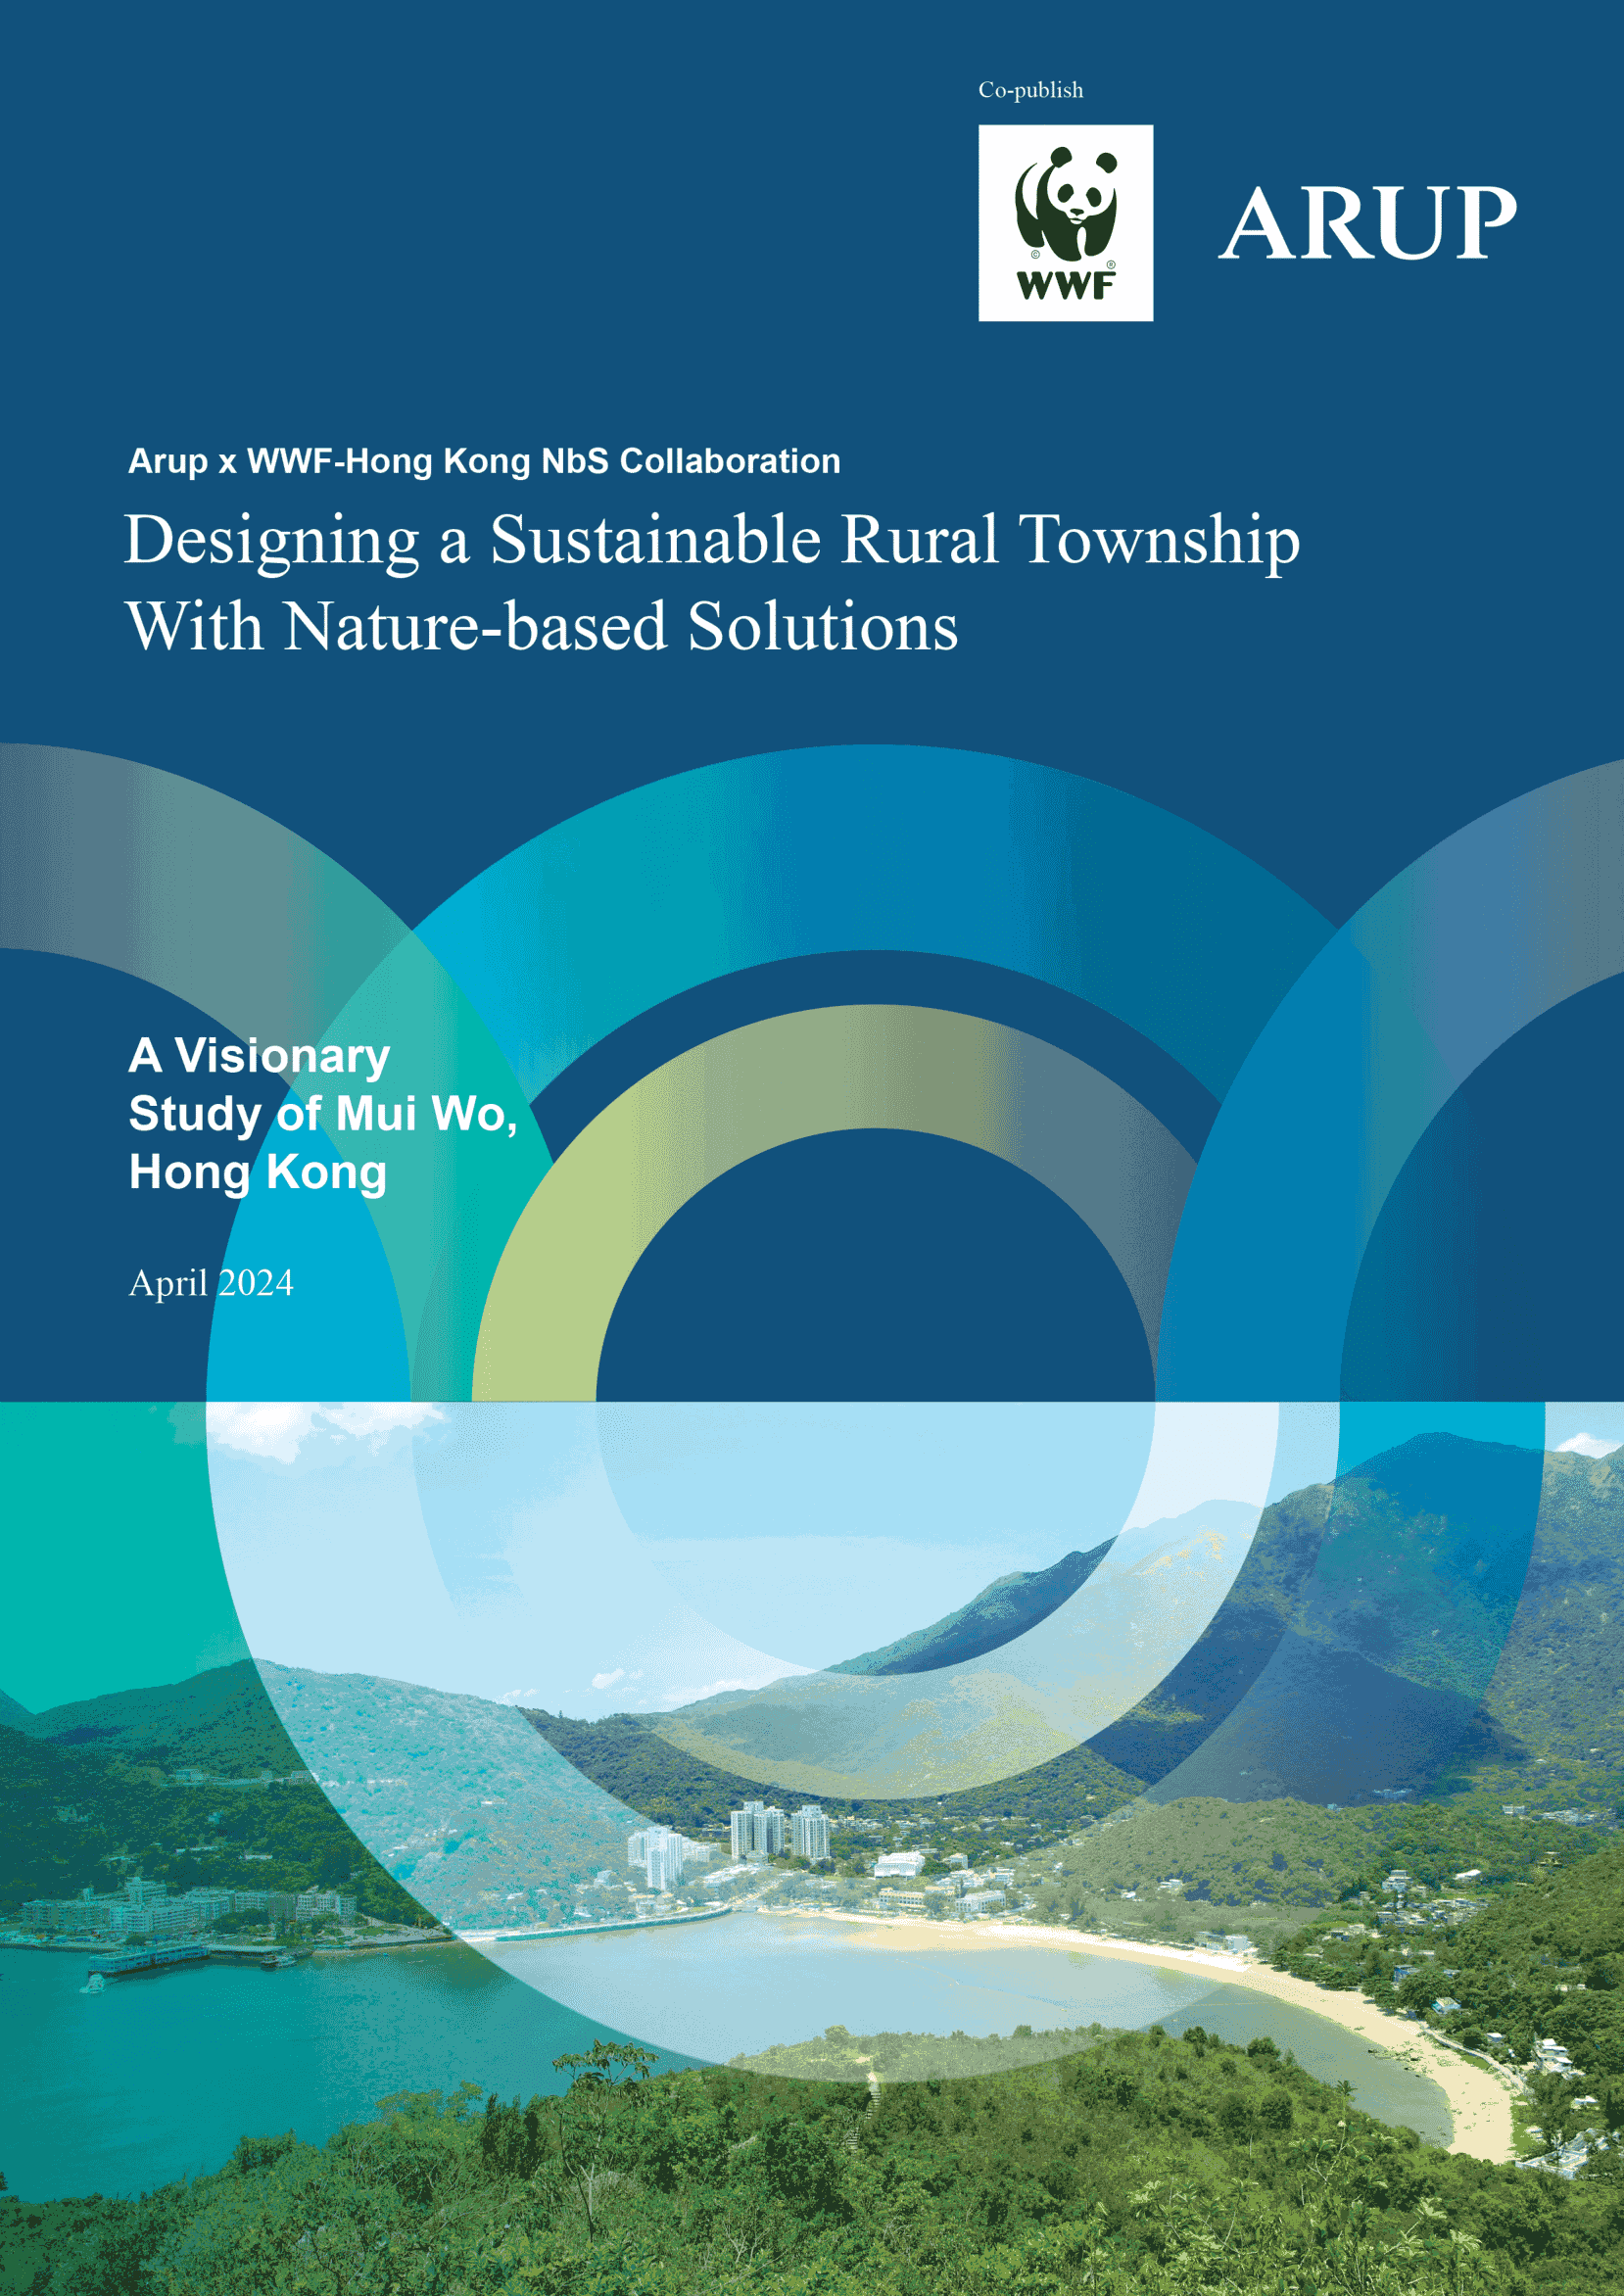 Designing_a_Sustainable_Rural_Township_With_Naturebased_Solutions-01_1_bic.png